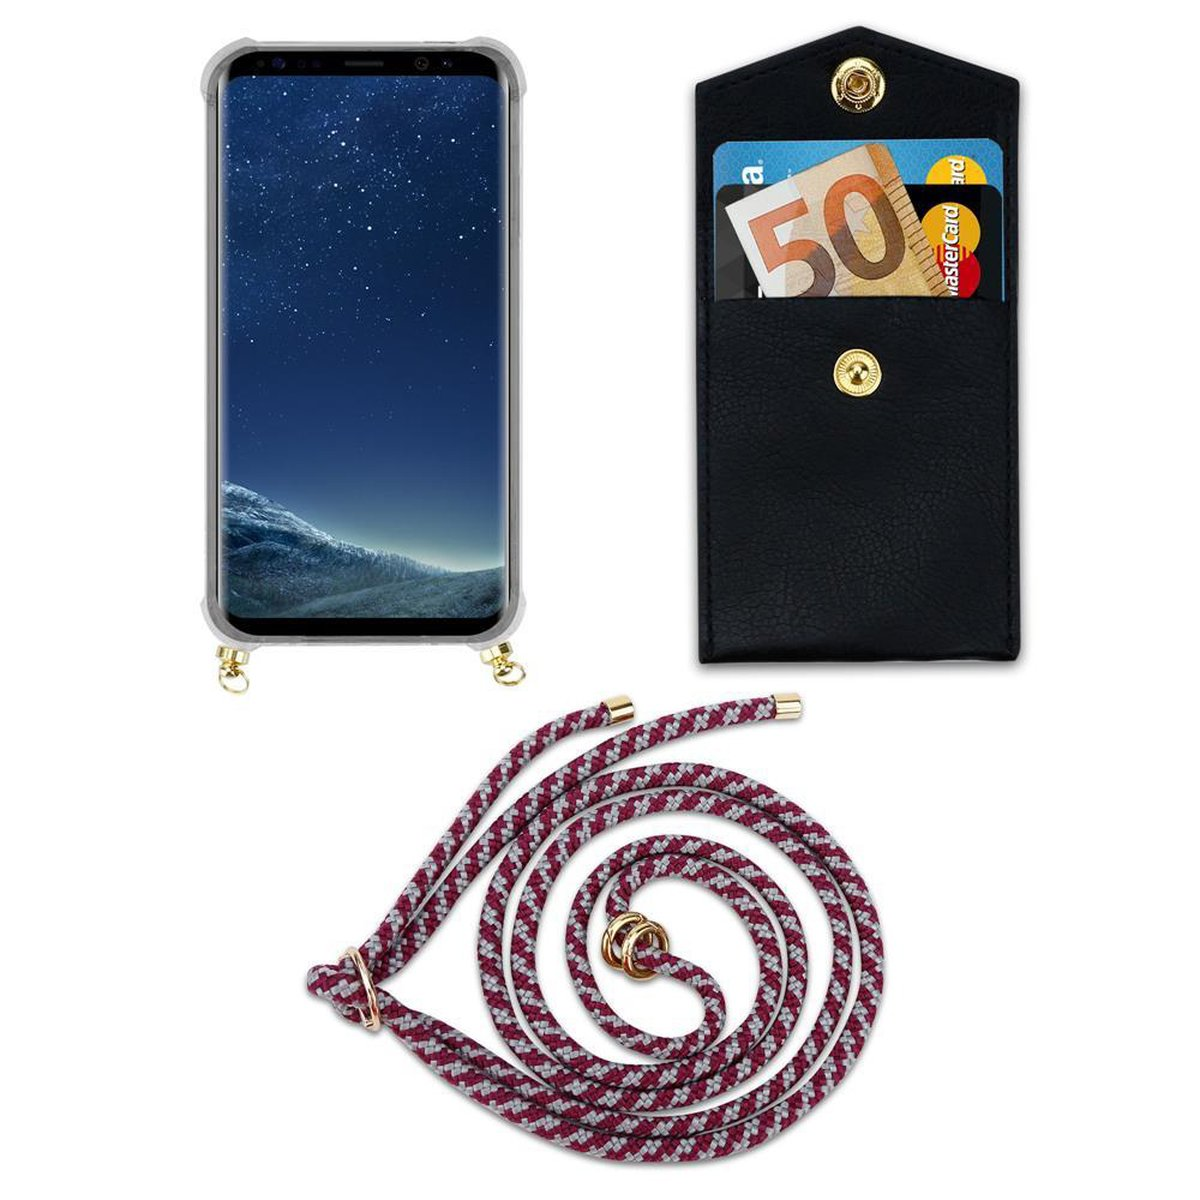 CADORABO Handy Kette mit Gold Band Galaxy Hülle, abnehmbarer S8 ROT Samsung, Ringen, und Kordel WEIß Backcover, PLUS